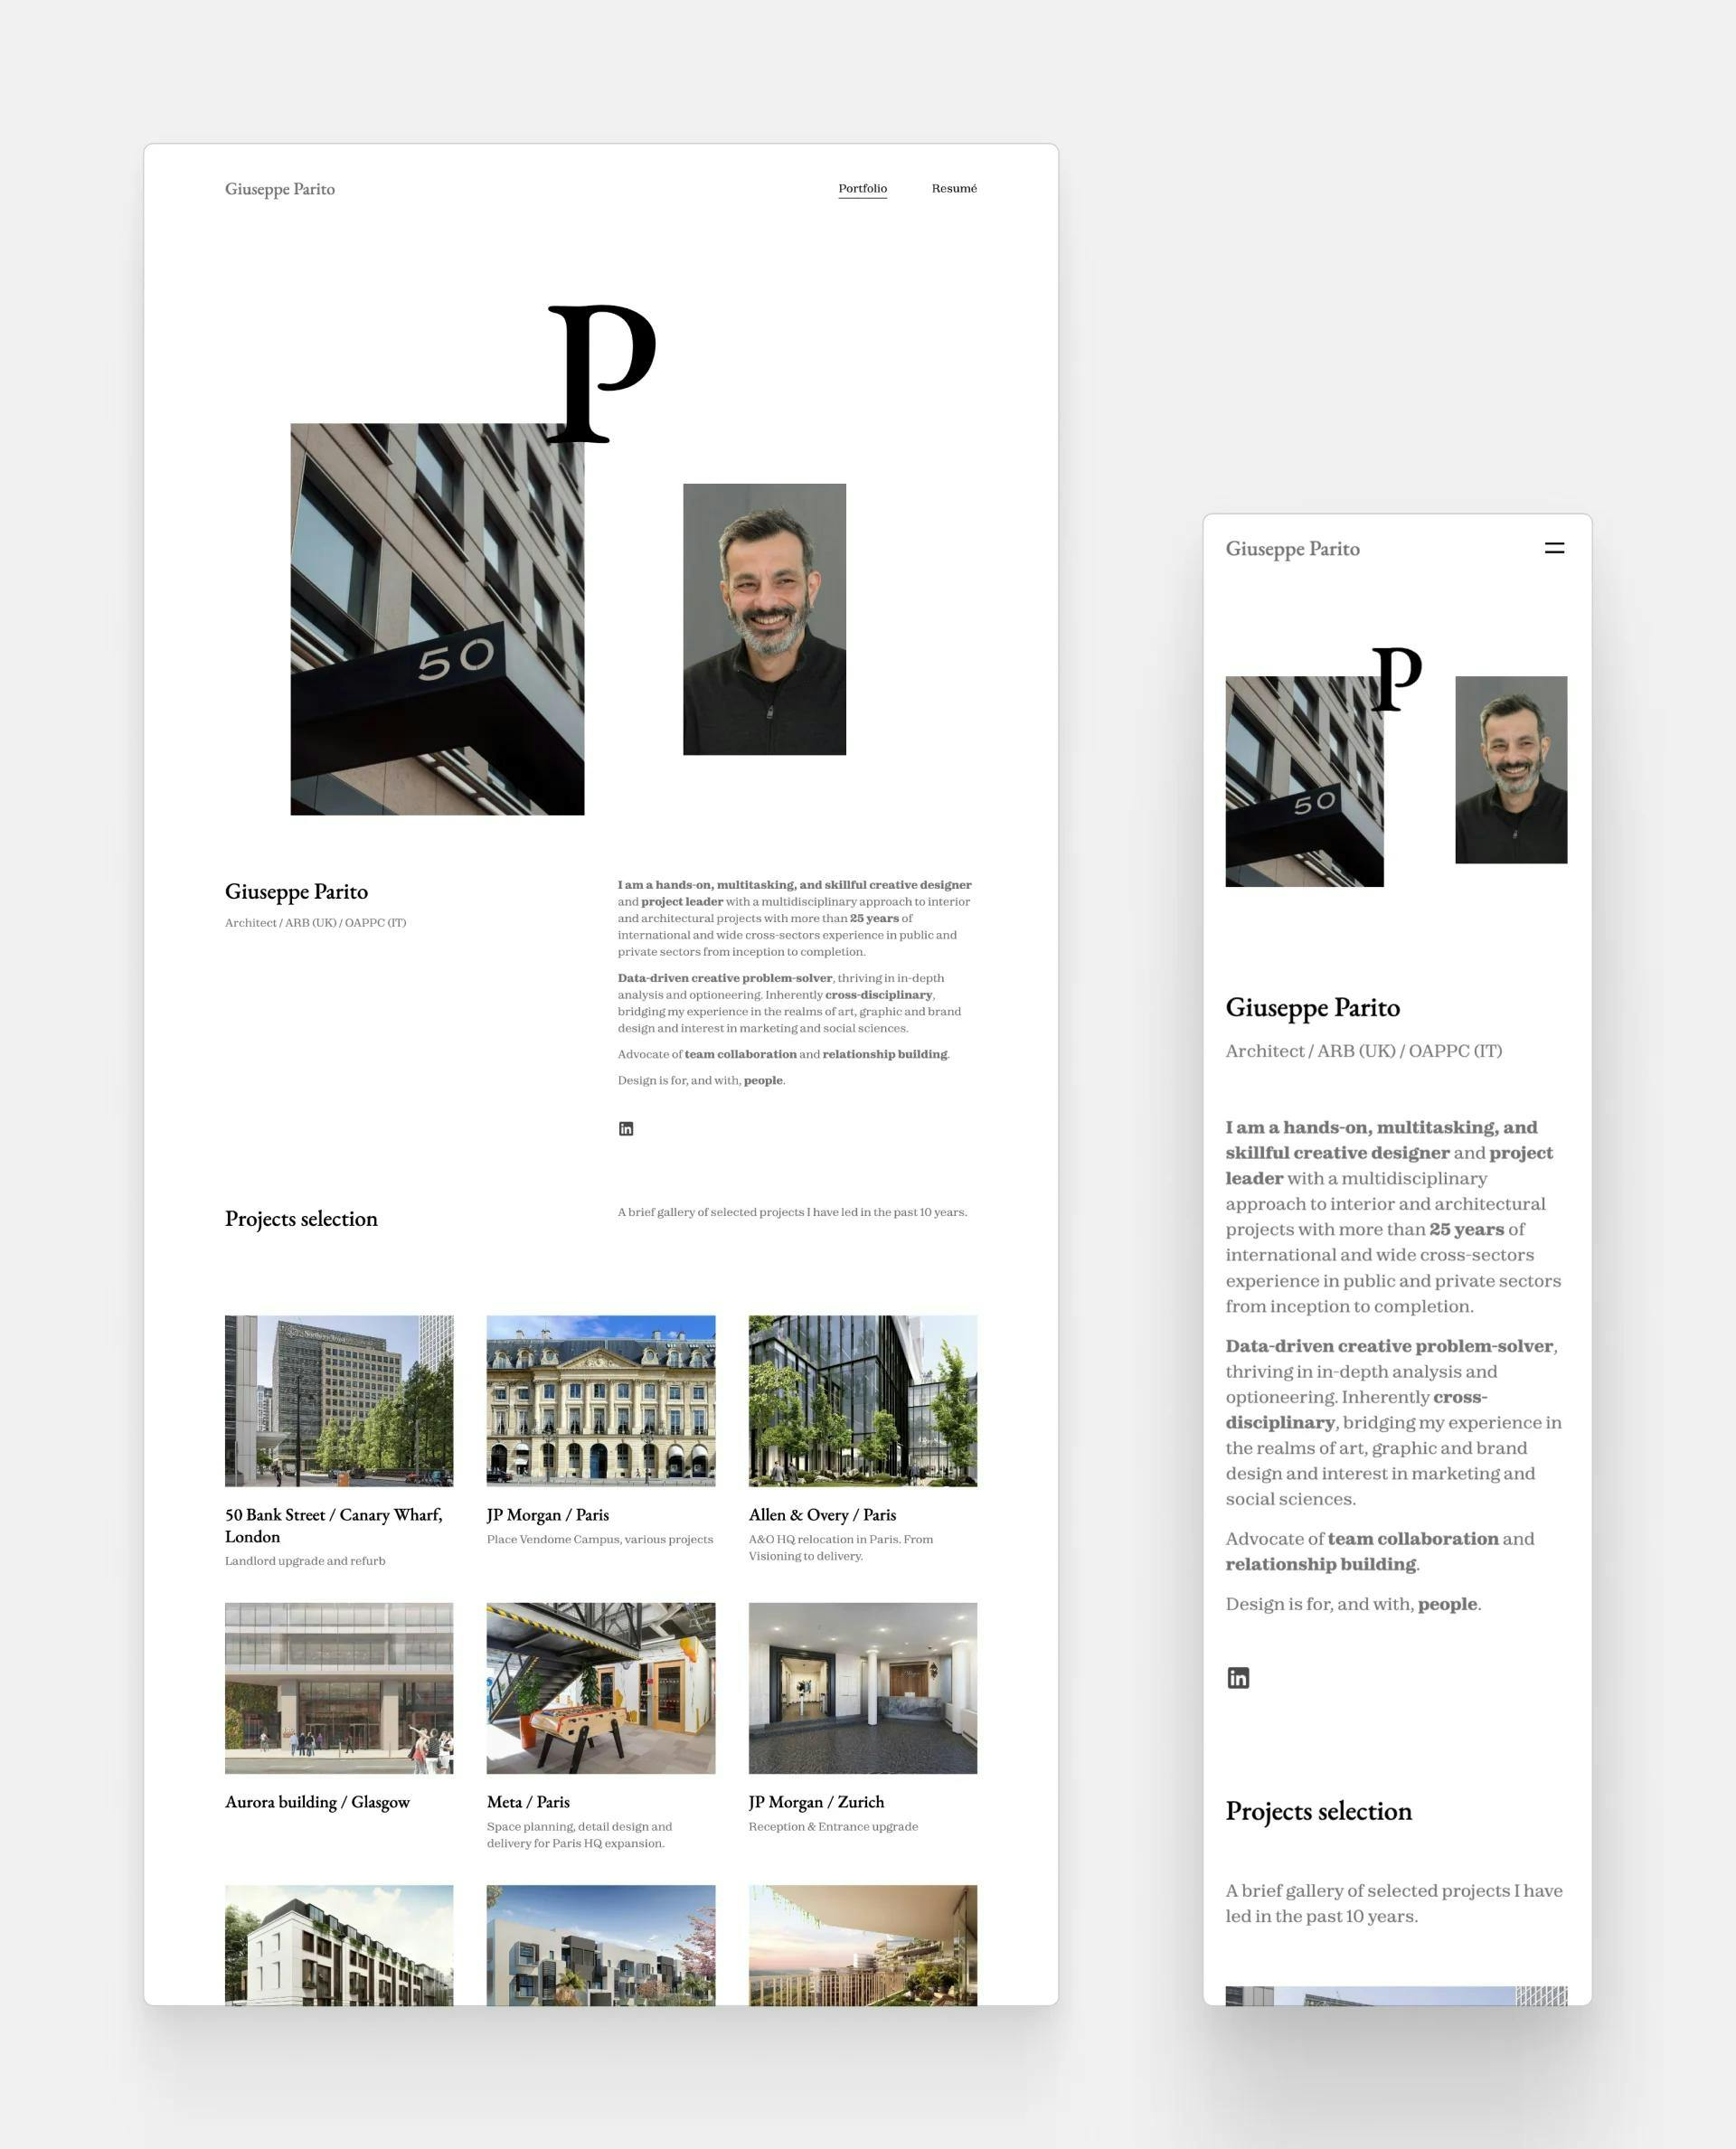 Desktop and mobile screenshots of Giuseppe Parito's outstanding portfolio website. The hero is just his initial and two images in an offset layout—one of his best project, and another one of himself, giving the portfolio a personal touch.